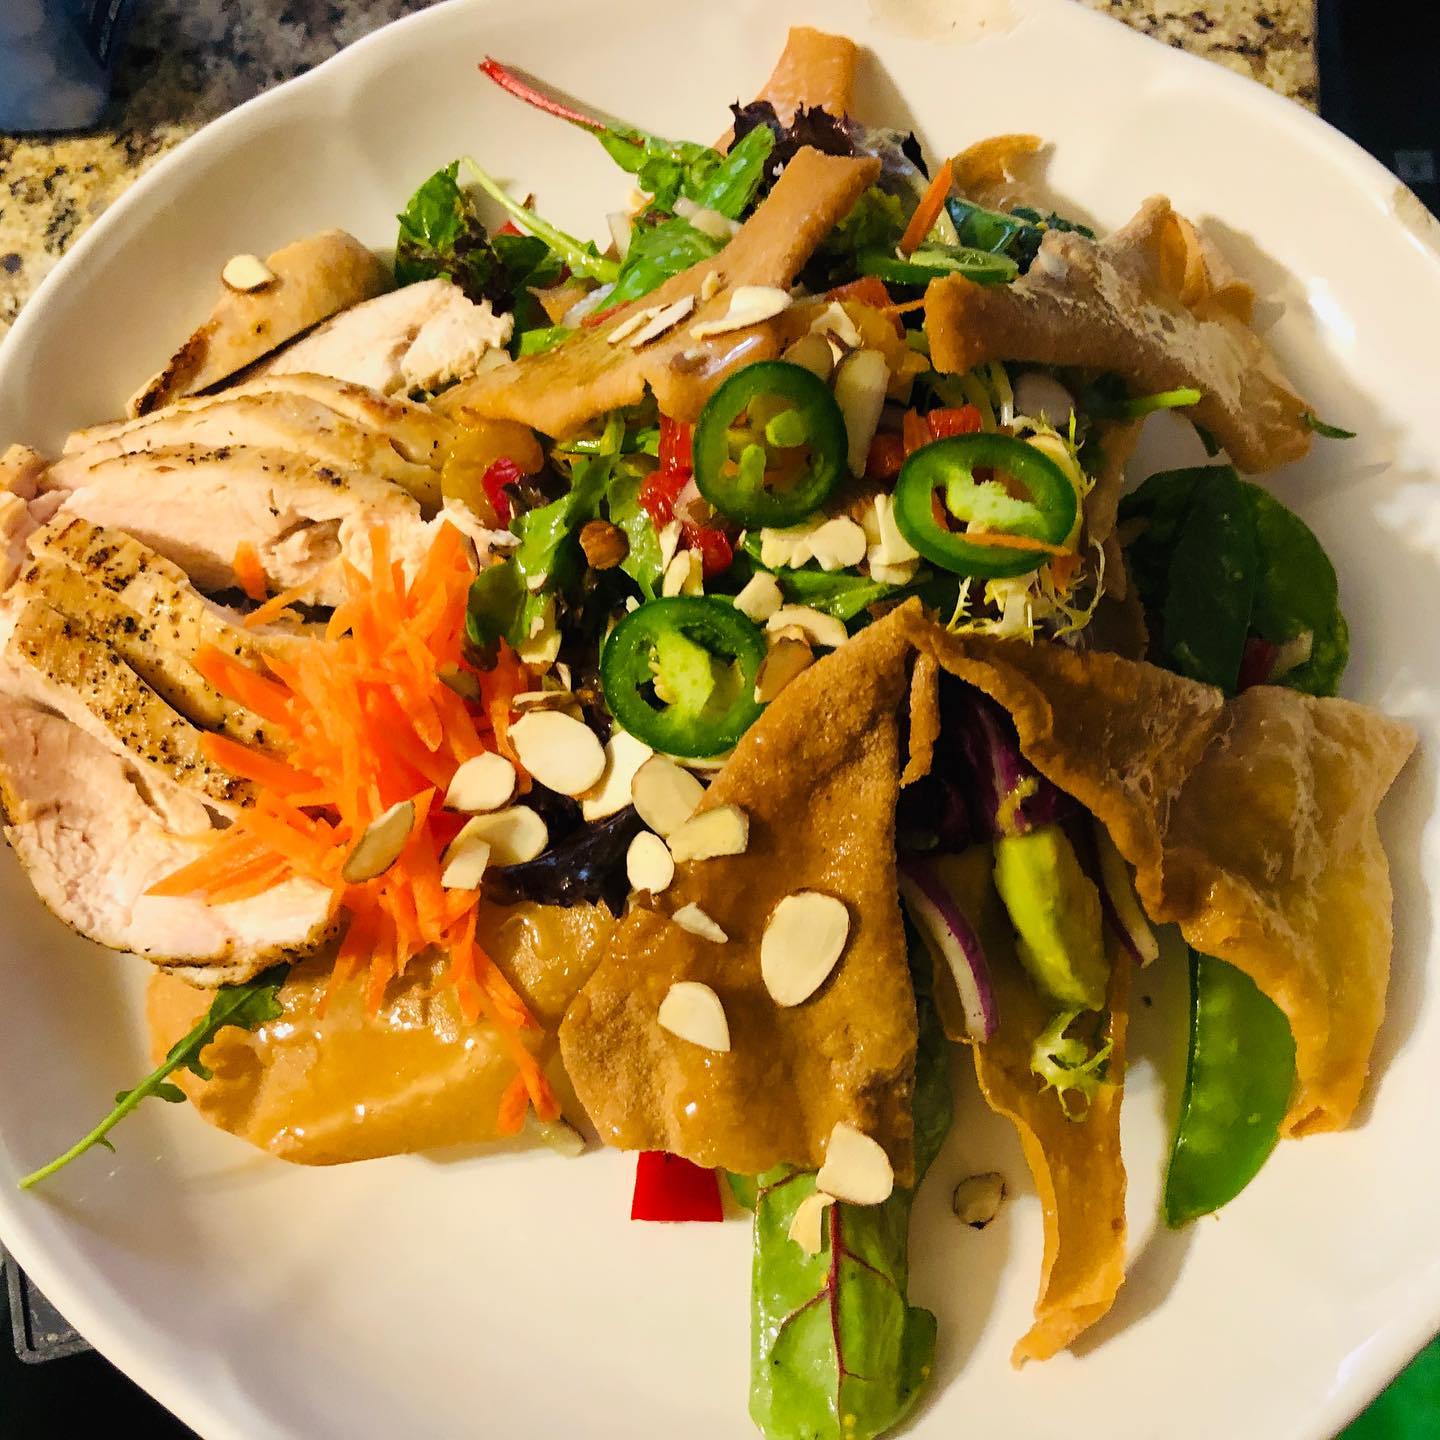 It's been a while since my last post. But really considering getting back into it. Soon enough I'm sure. Quickly snapped a pic of this Luau Chicken Salad I made last night with crunchy honey wontons. Absolutely delicious. Hope everyone is well. Have been missing you guys!#dinner #chicken #salad #winnipegeats #wpgeats #winnipeg #healthyfood #healthylifestyle #healthyliving #farmtotable #farmtofork #forkyeah #cooking #food #foodporn #instafood #homemade #foodphotography #recipe #lunch